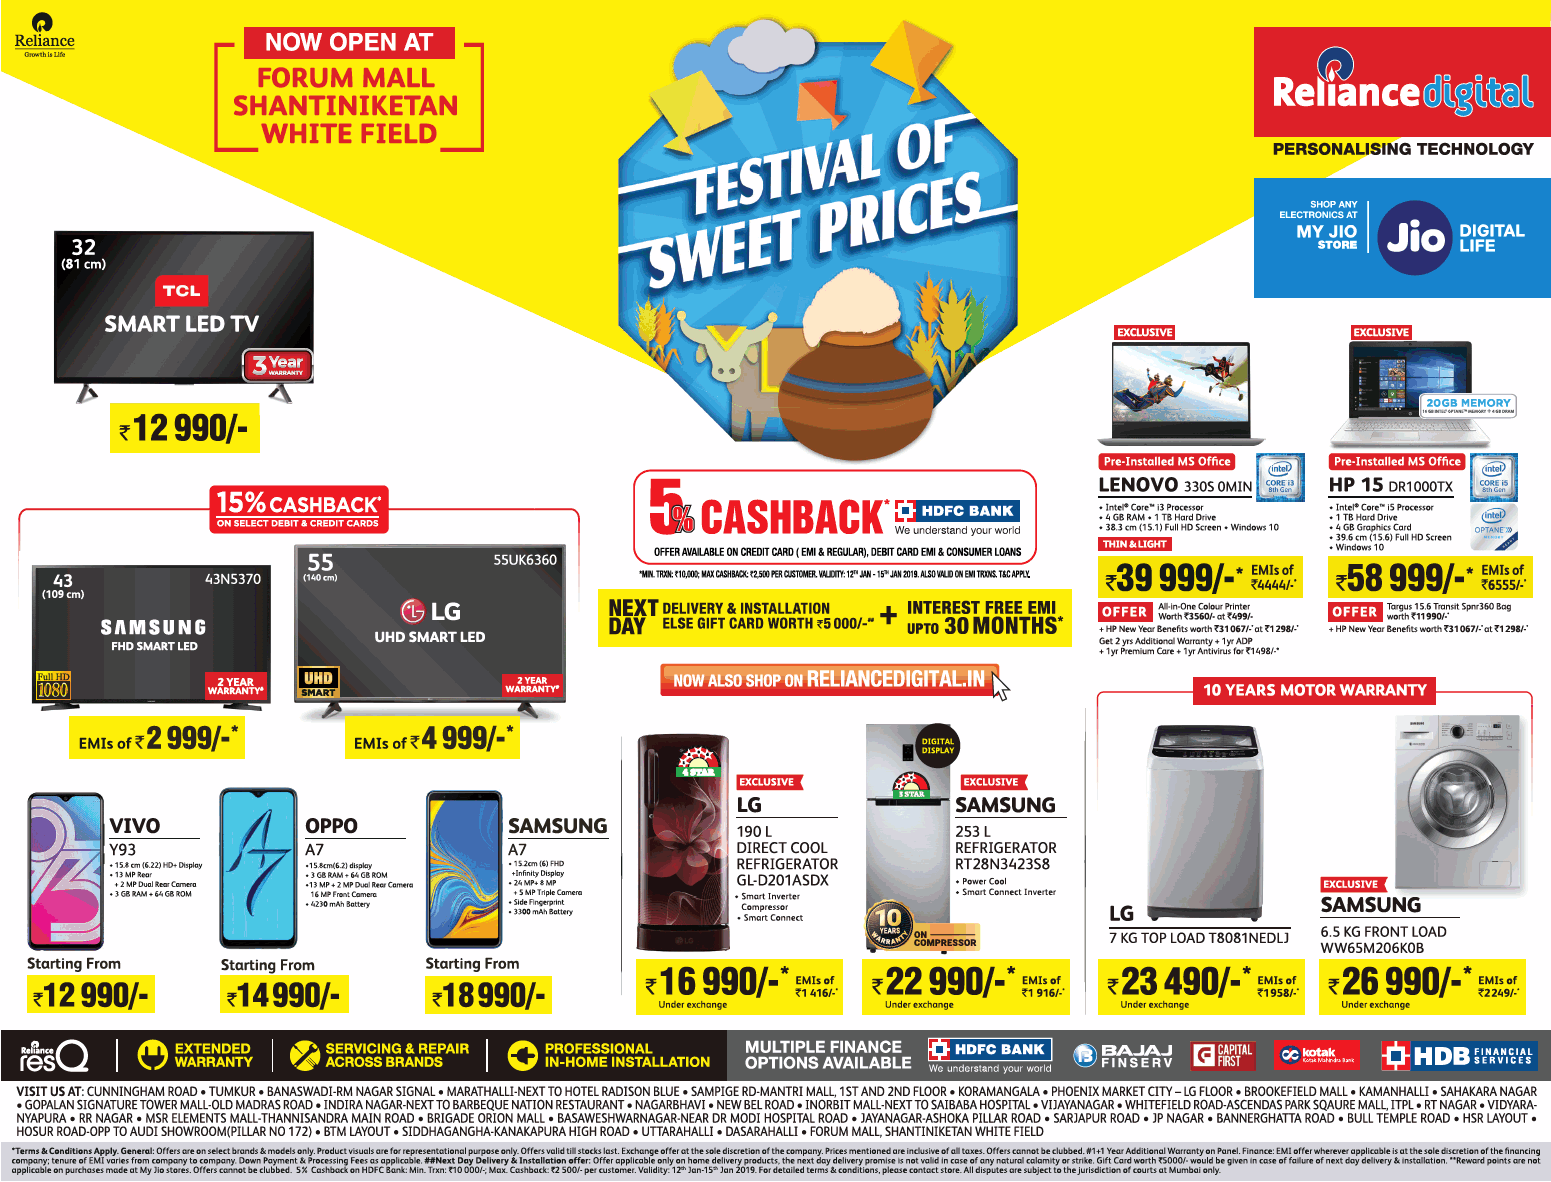 reliance-digital-festival-of-sweet-prices-forum-mall-white-field-ad-times-of-india-bangalore-12-01-2019.png